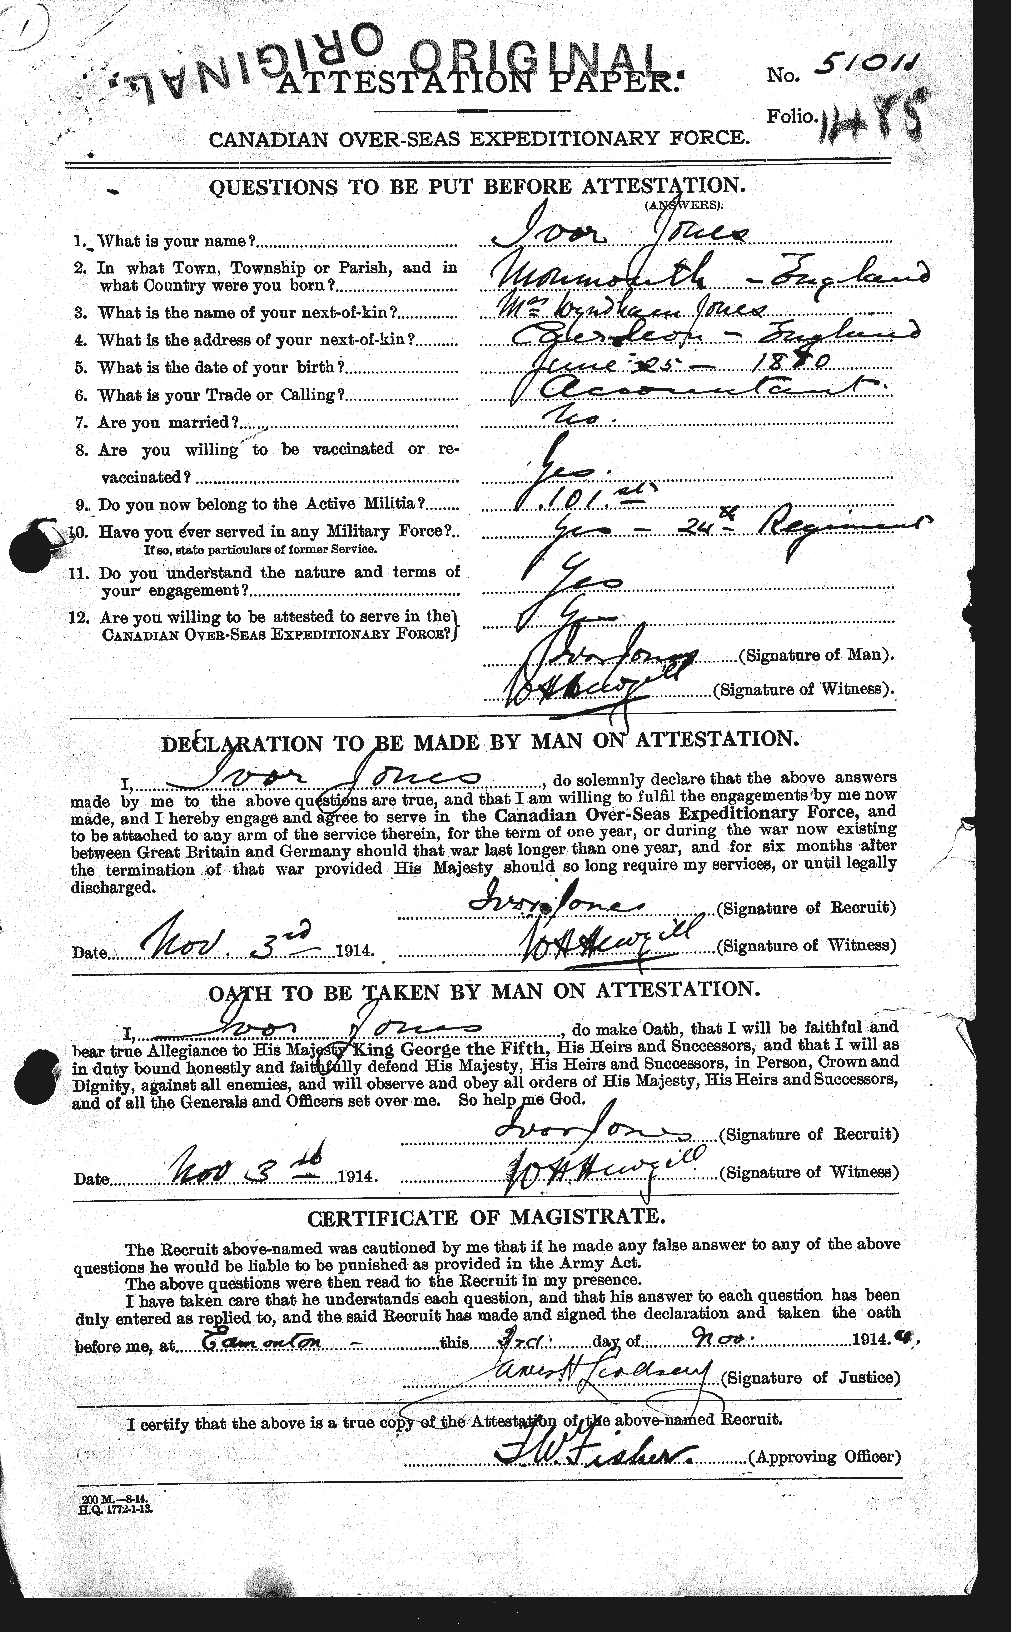 Personnel Records of the First World War - CEF 425555a